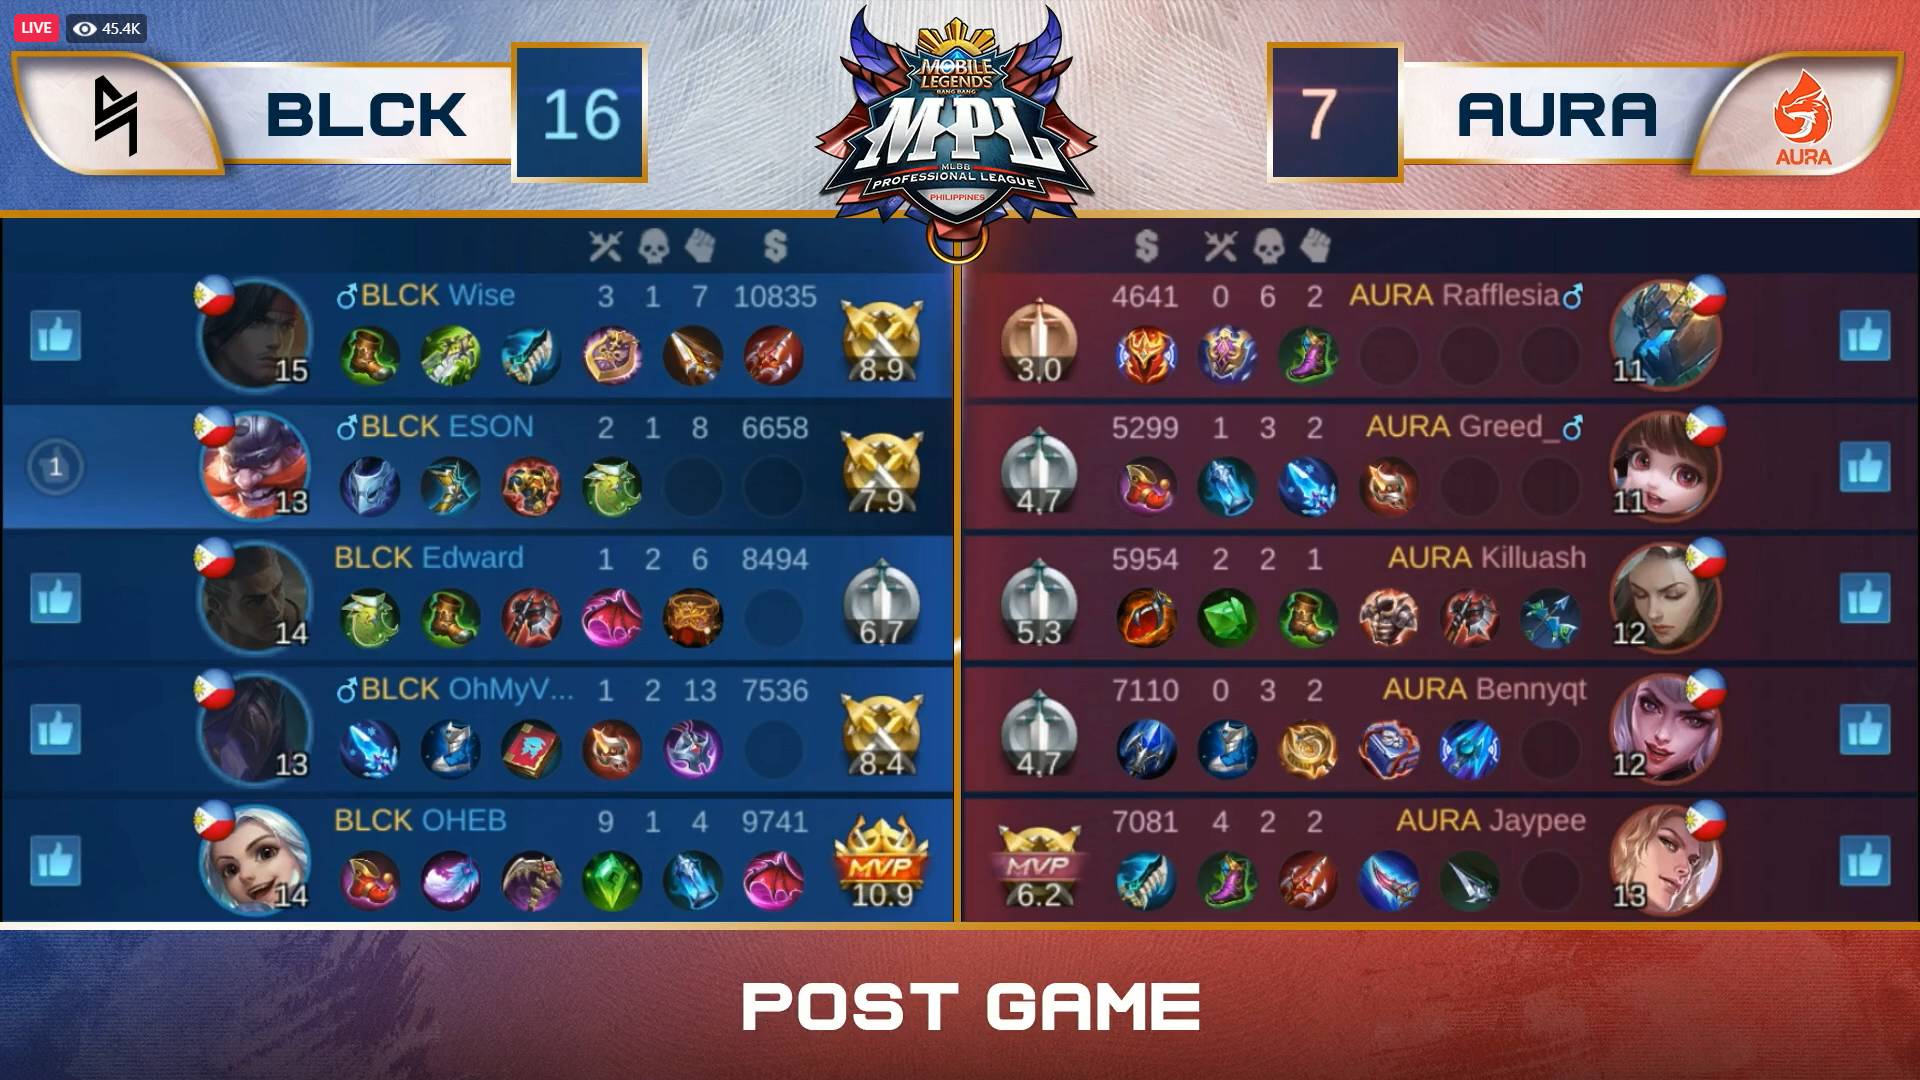 MPL-PH-7-Blacklist-def-Aura-PH-Game-3 ESON powers Blacklist to come-from-behind win vs Aura PH in MPL-PH ESports Mobile Legends MPL-PH News  - philippine sports news